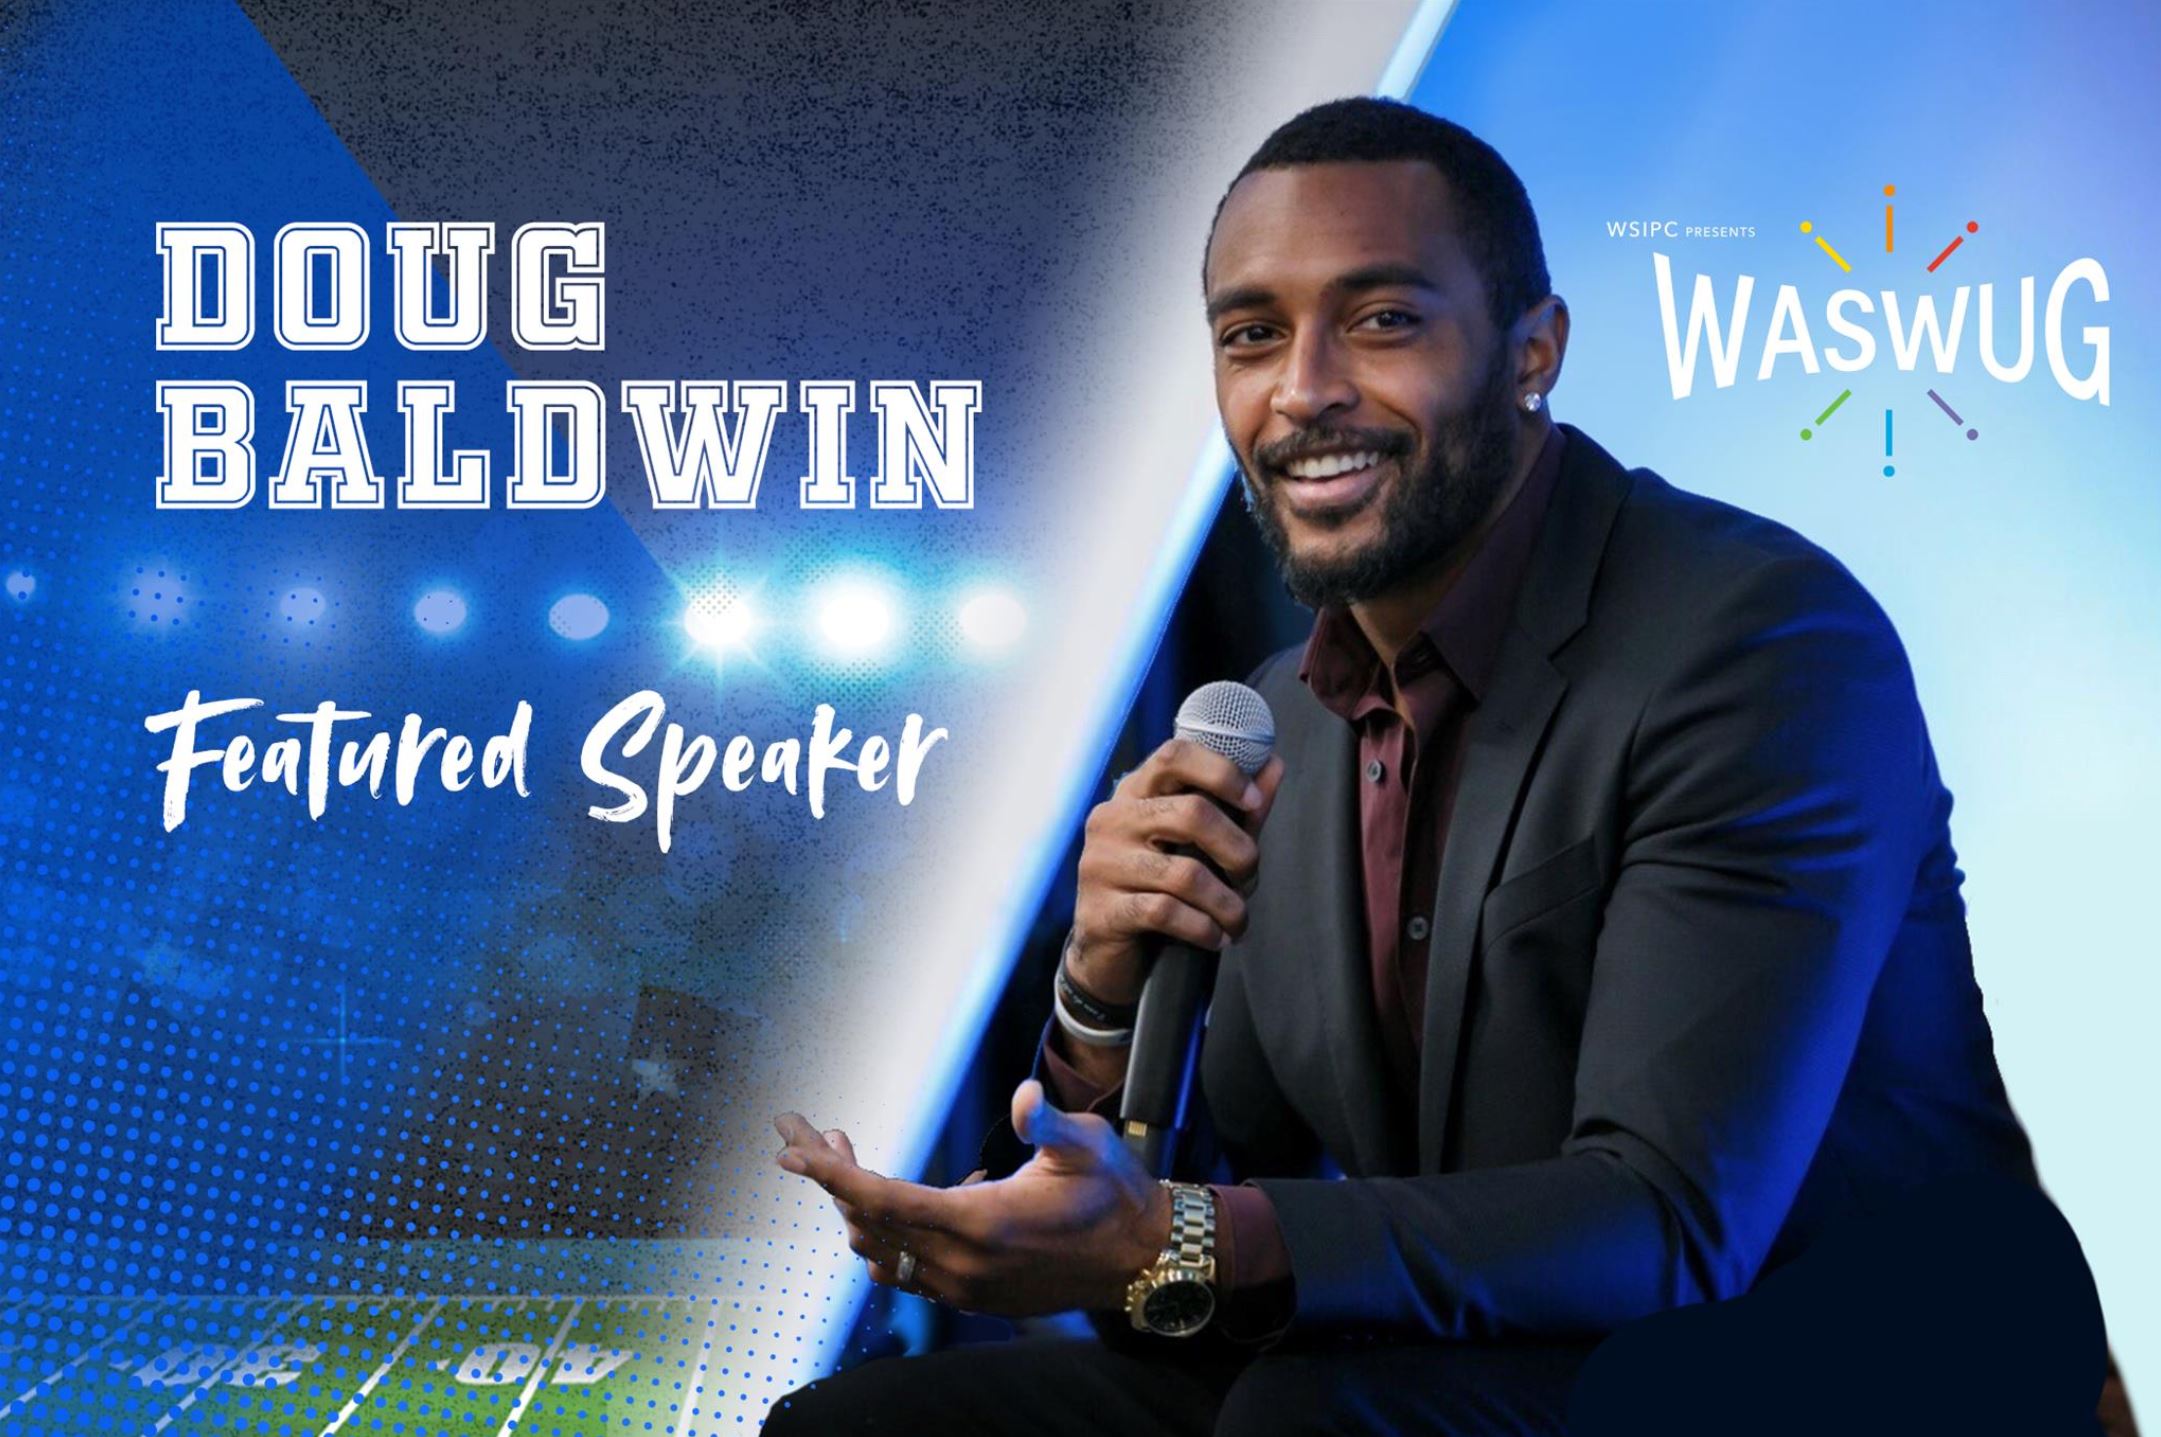 Doug Baldwin, Jr. is our Featured Speaker at WASWUG Fall! WSIPC, K12